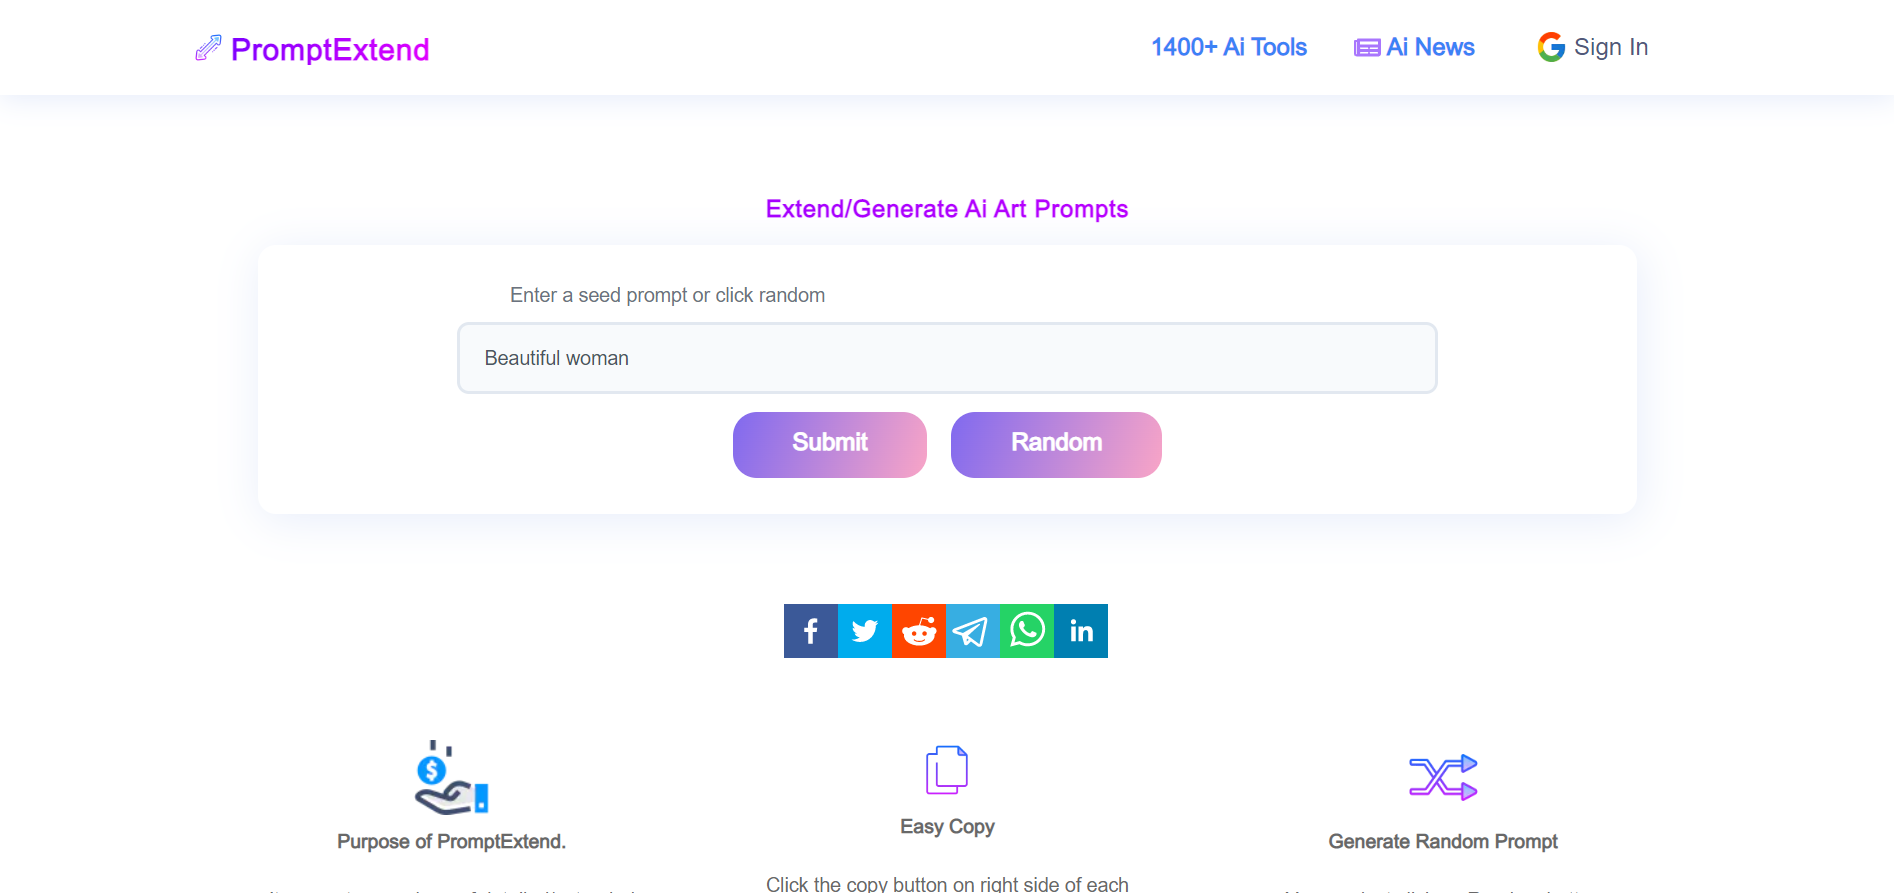 Take Your AI Art to the Next Level with Promptextend.com